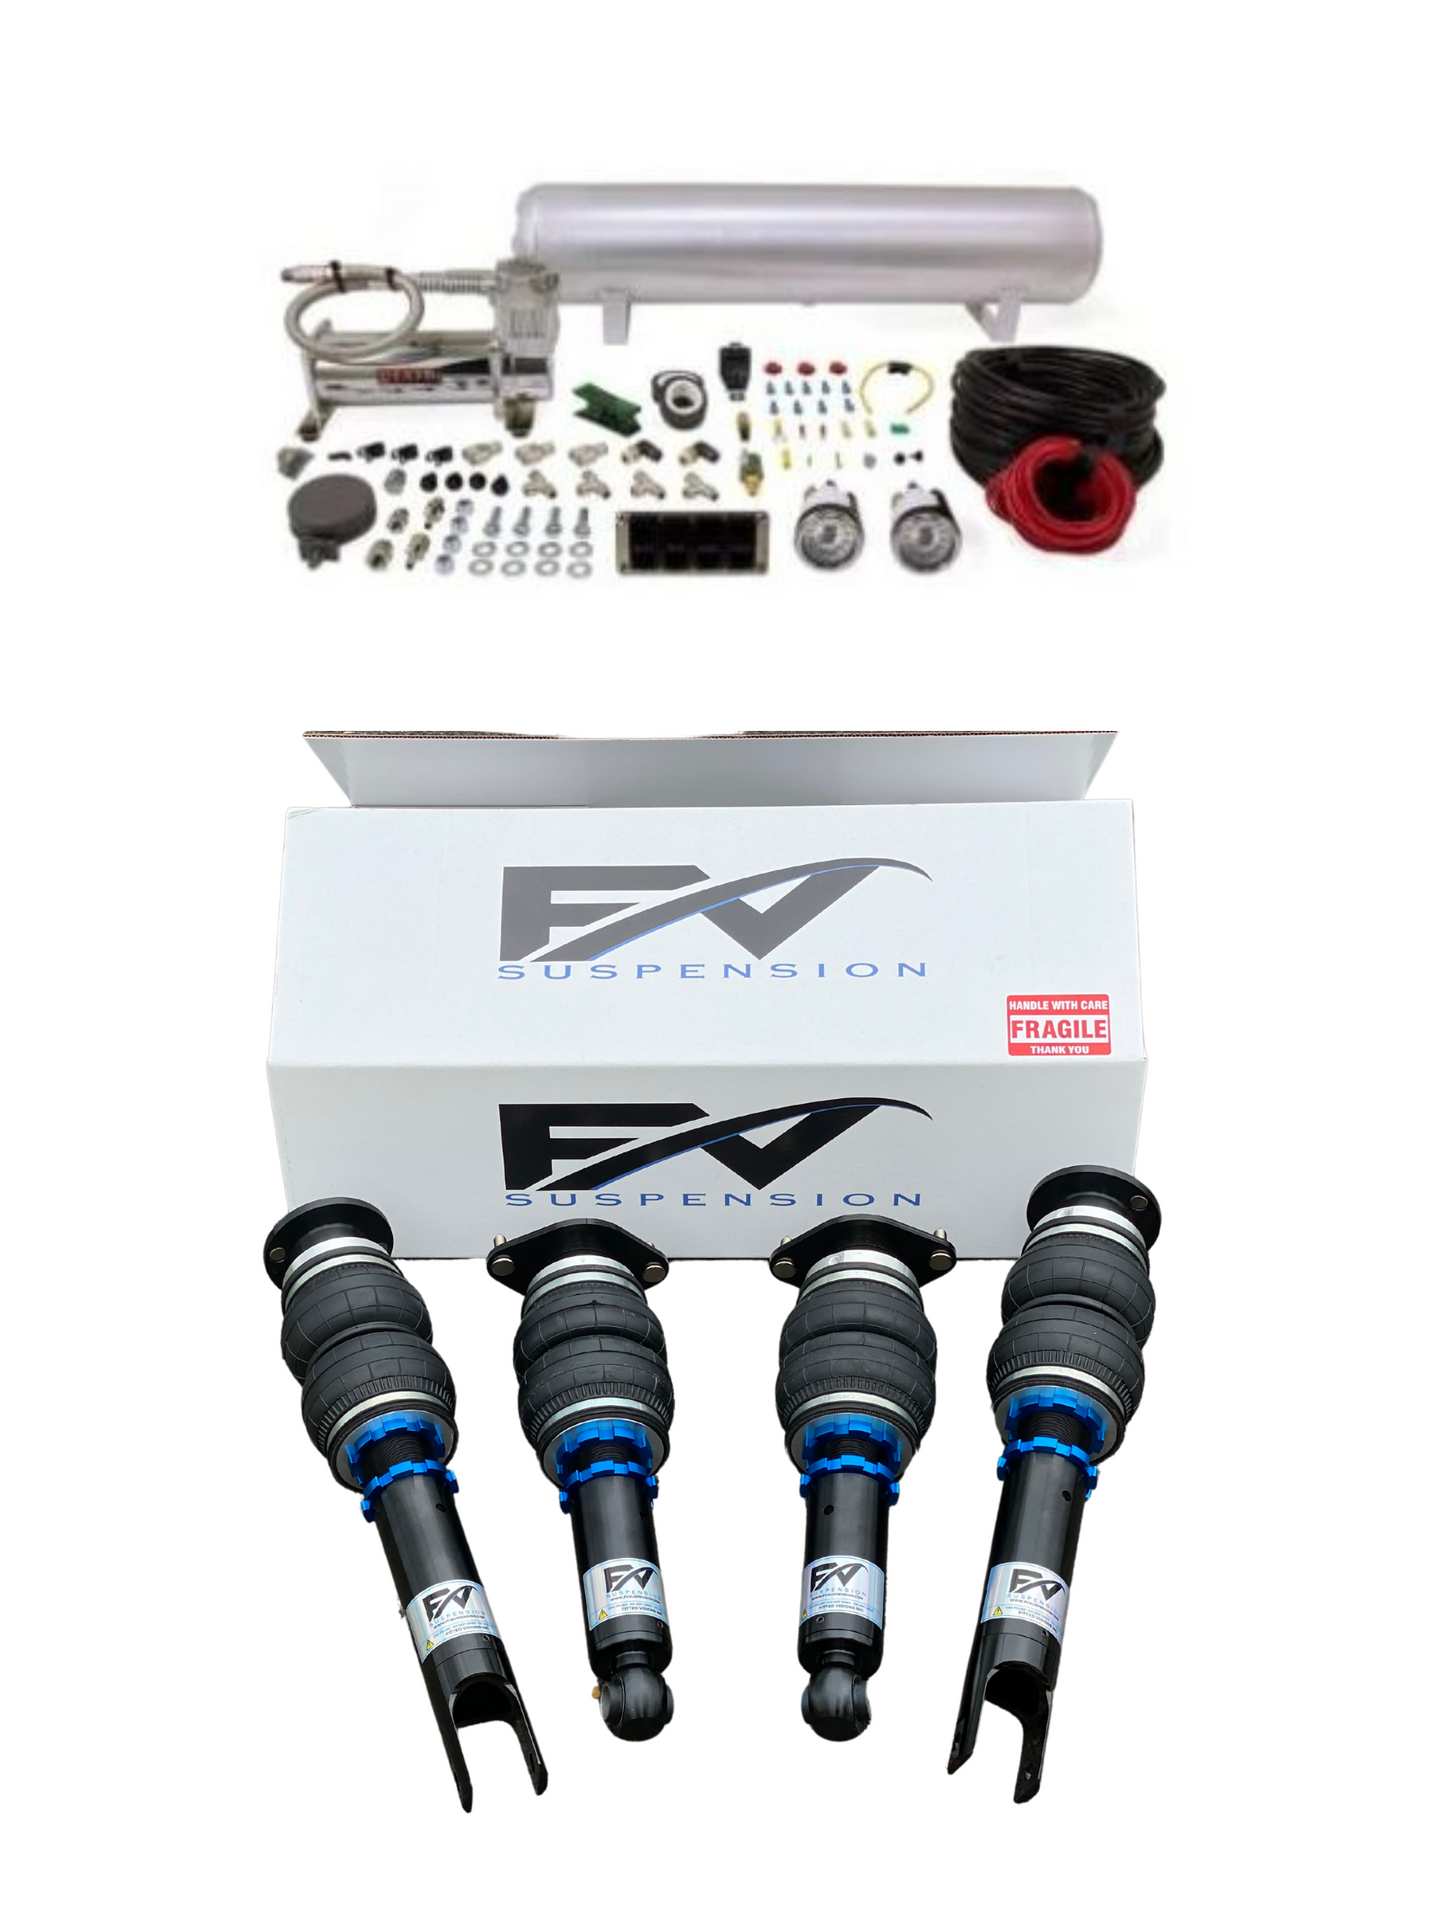 FV Suspension Tier 1 Budget kit Complete Air Ride kit for 90-18 Mercedes-Benz G-Wagon W463 - Full Kit